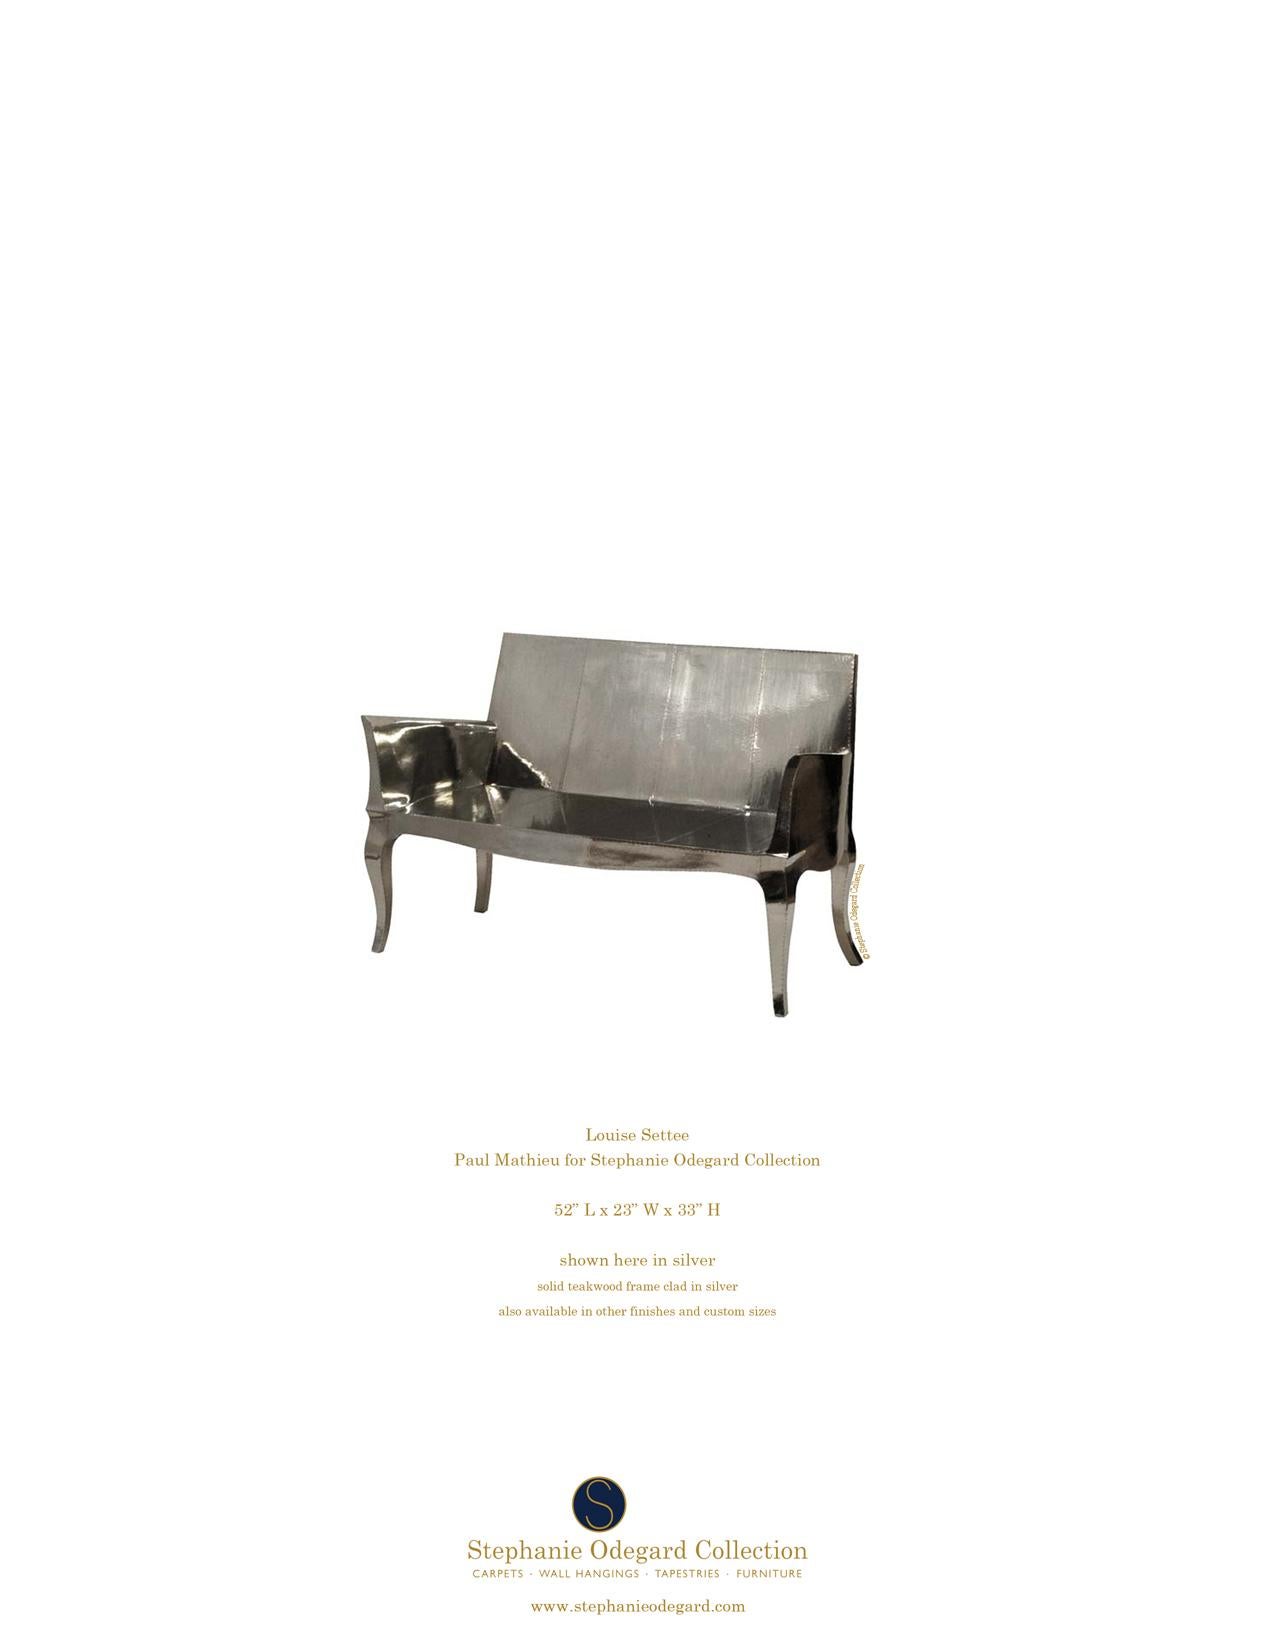 American Louise Settee in White Bronze by Paul Mathieu for Stephanie Odegard For Sale